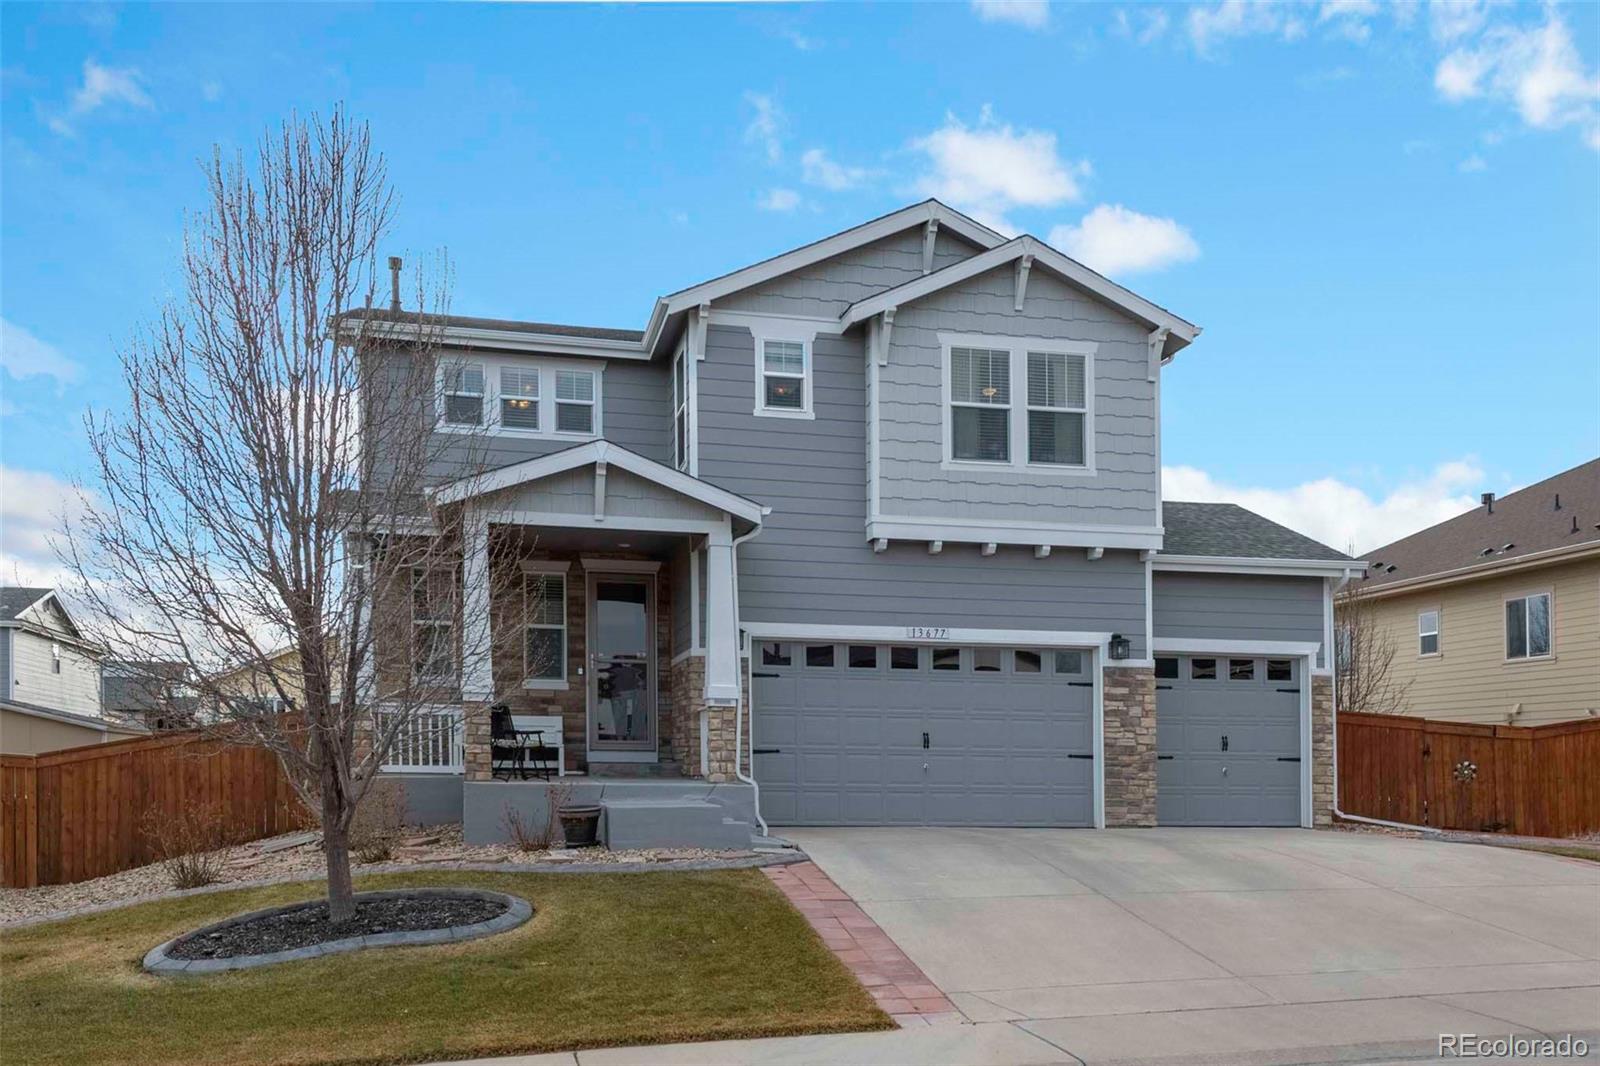 Report Image for 13677  Spruce Way,Thornton, Colorado